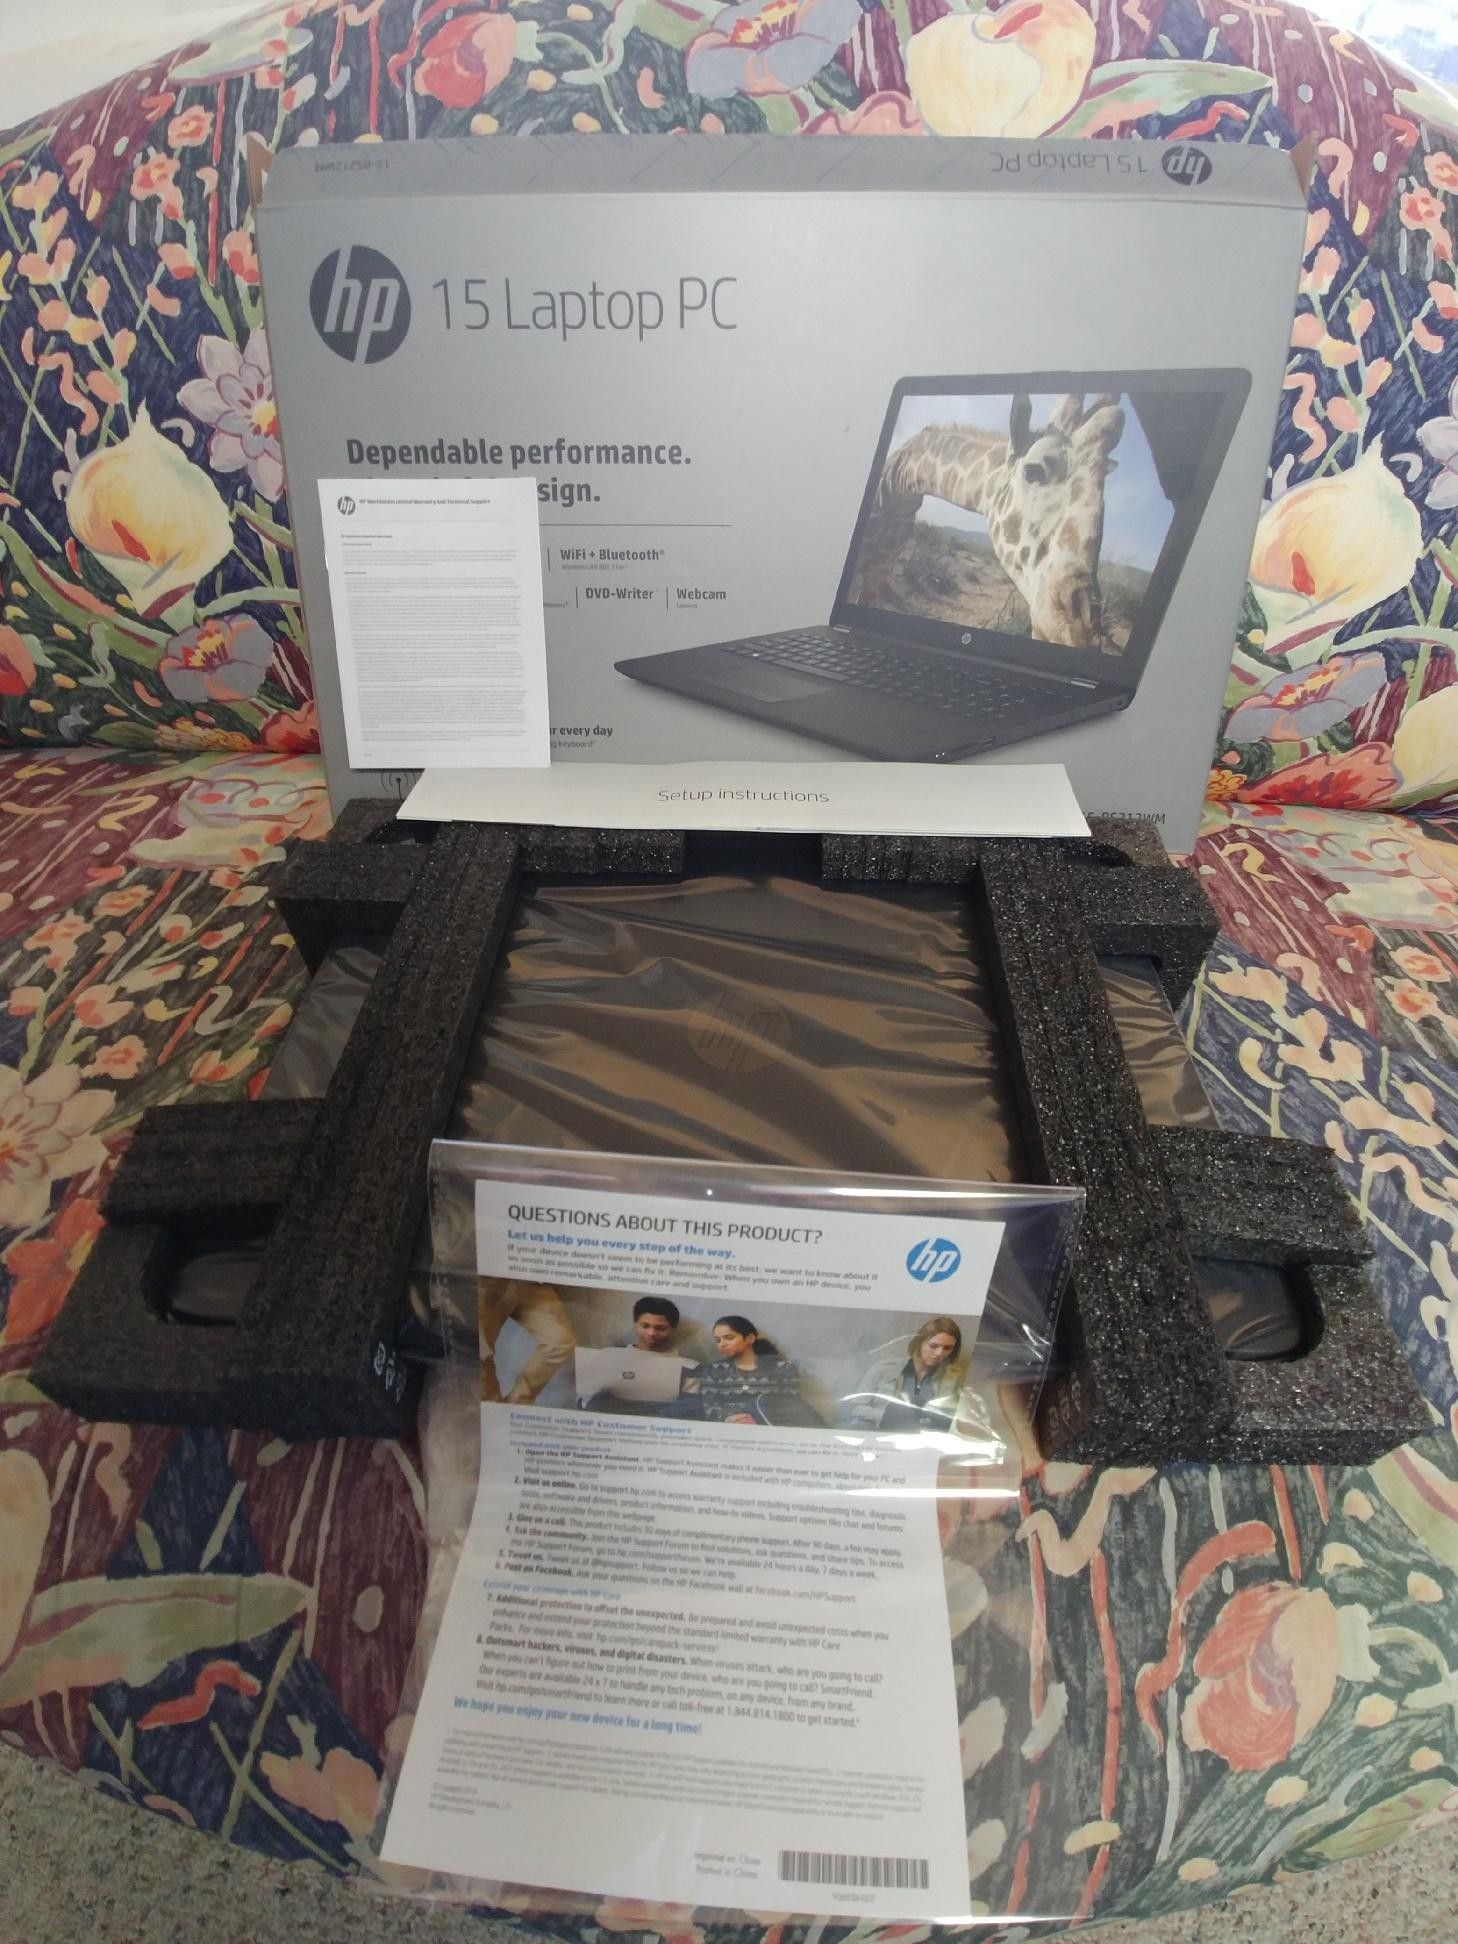 Brand new HP 15 laptop just opened never unpacked